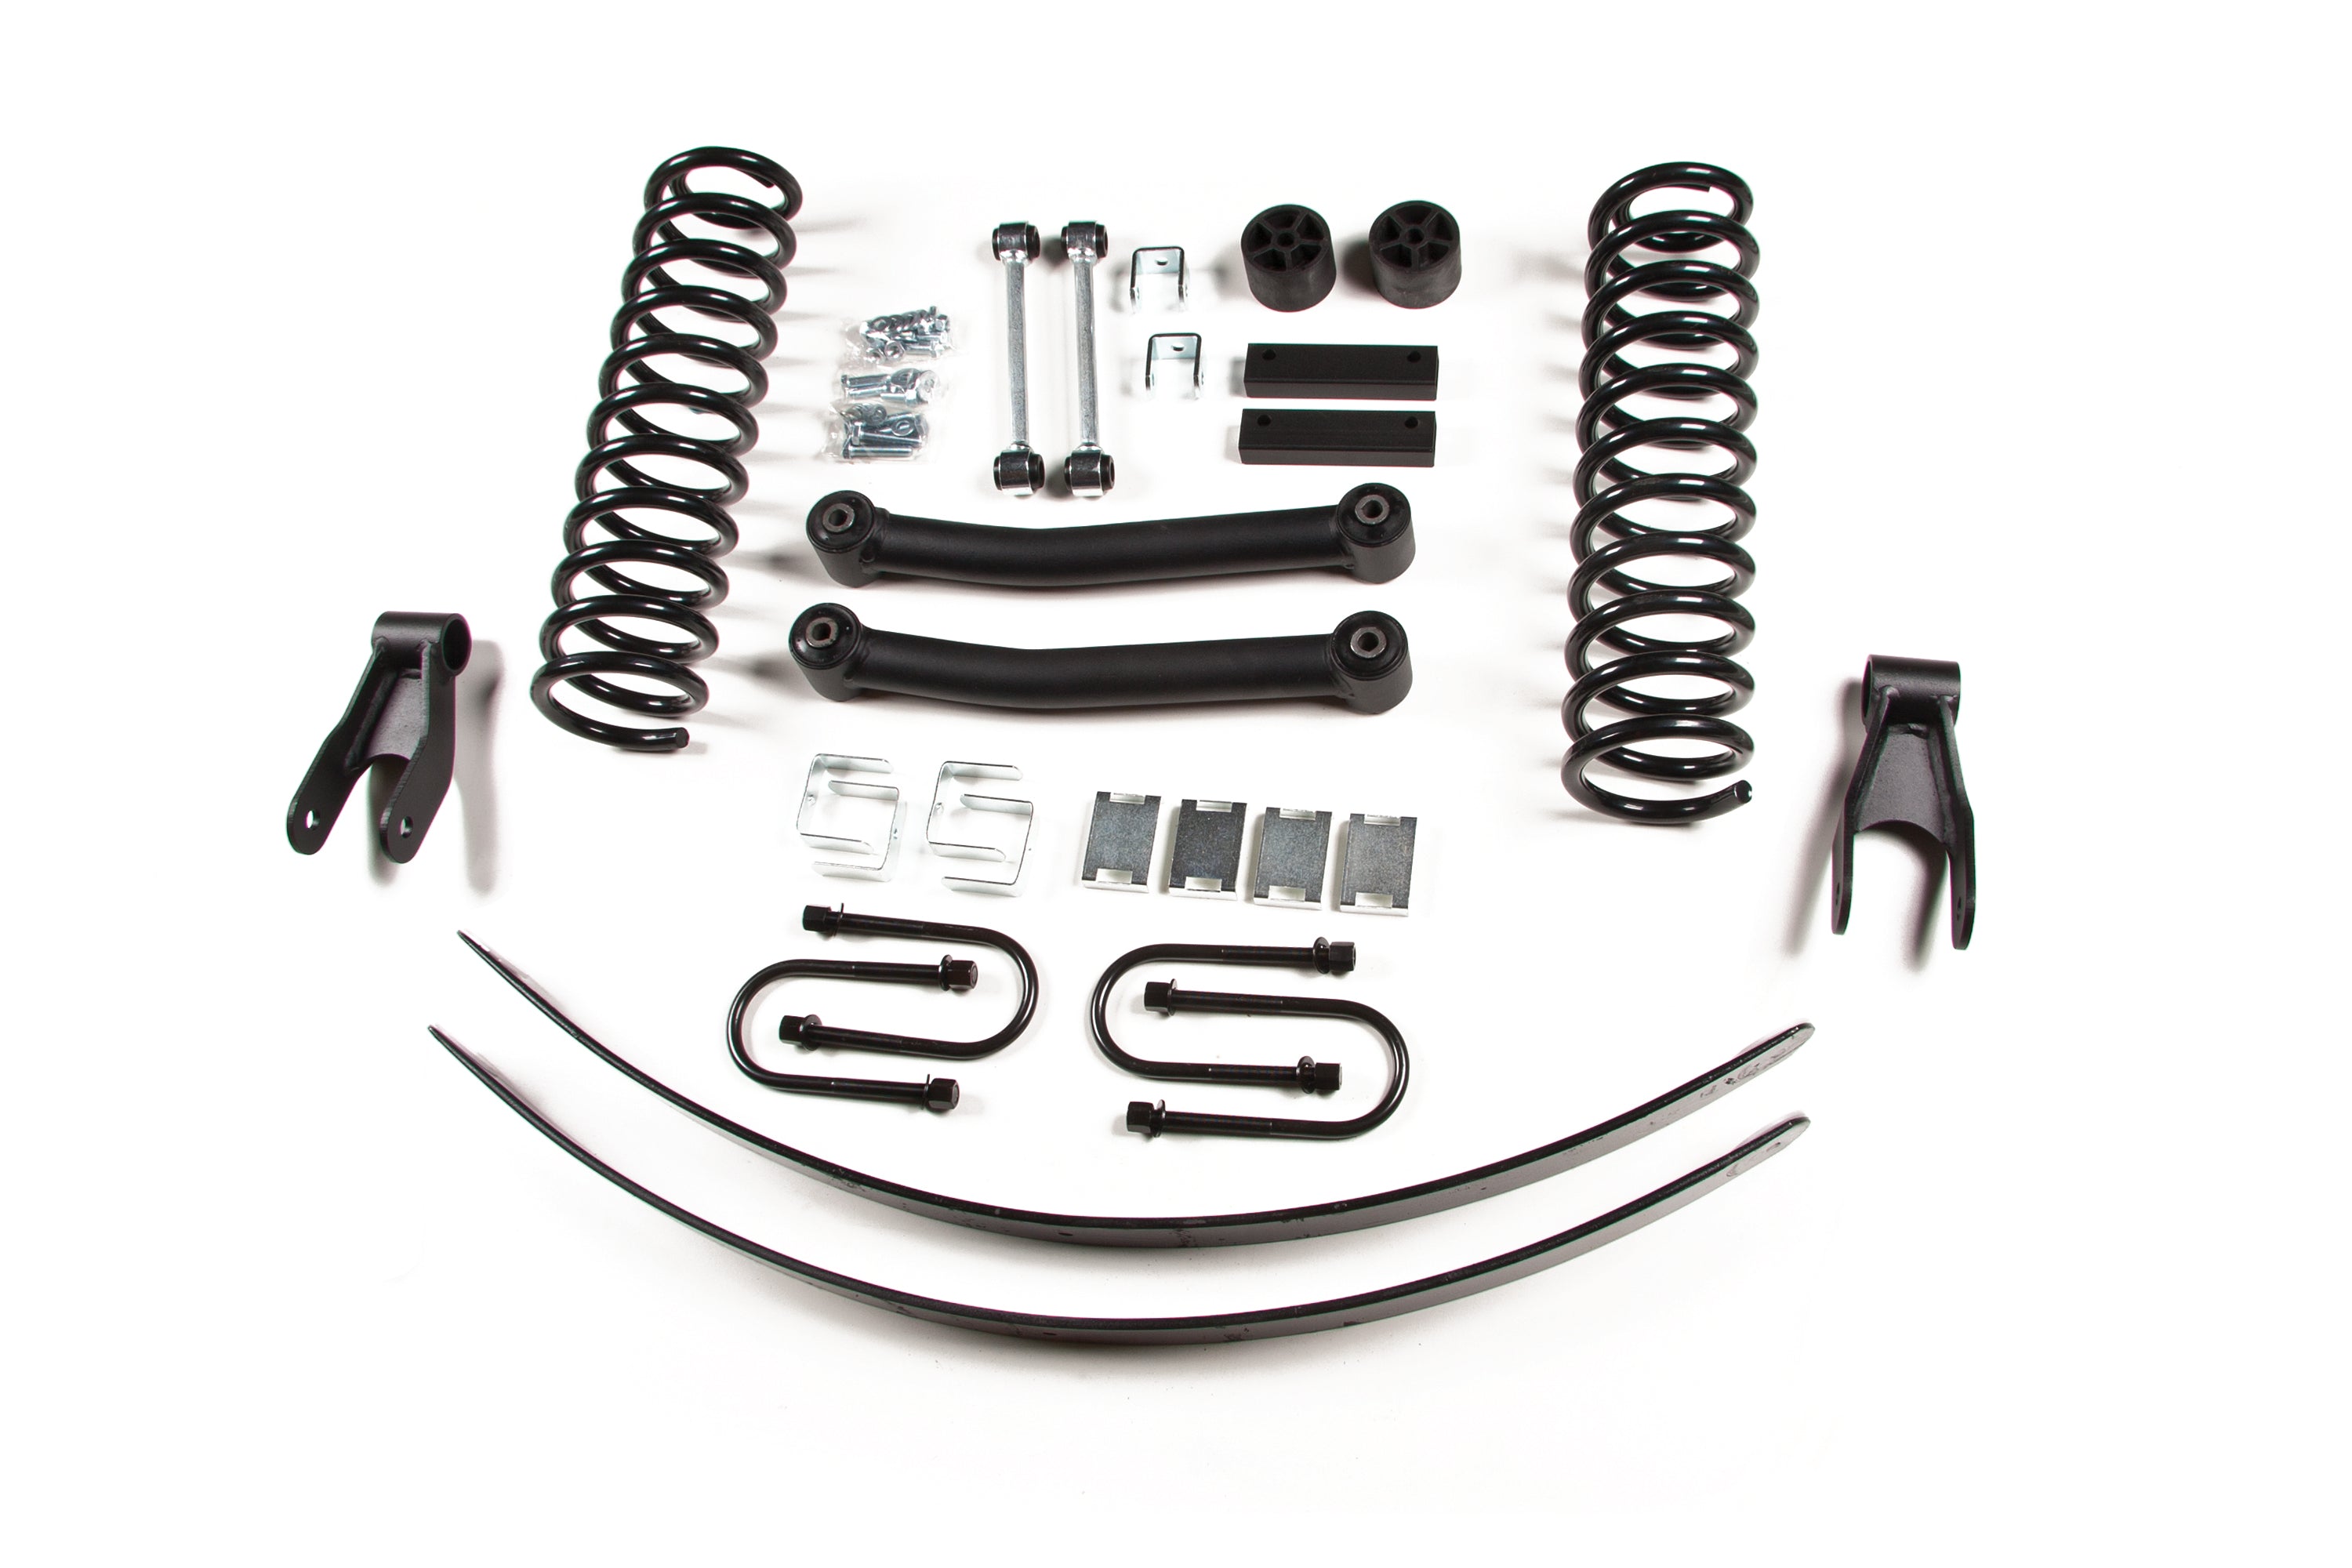 Zone Offroad Products ZONJ8 Zone 4.5 Coil Spring Lift Kit